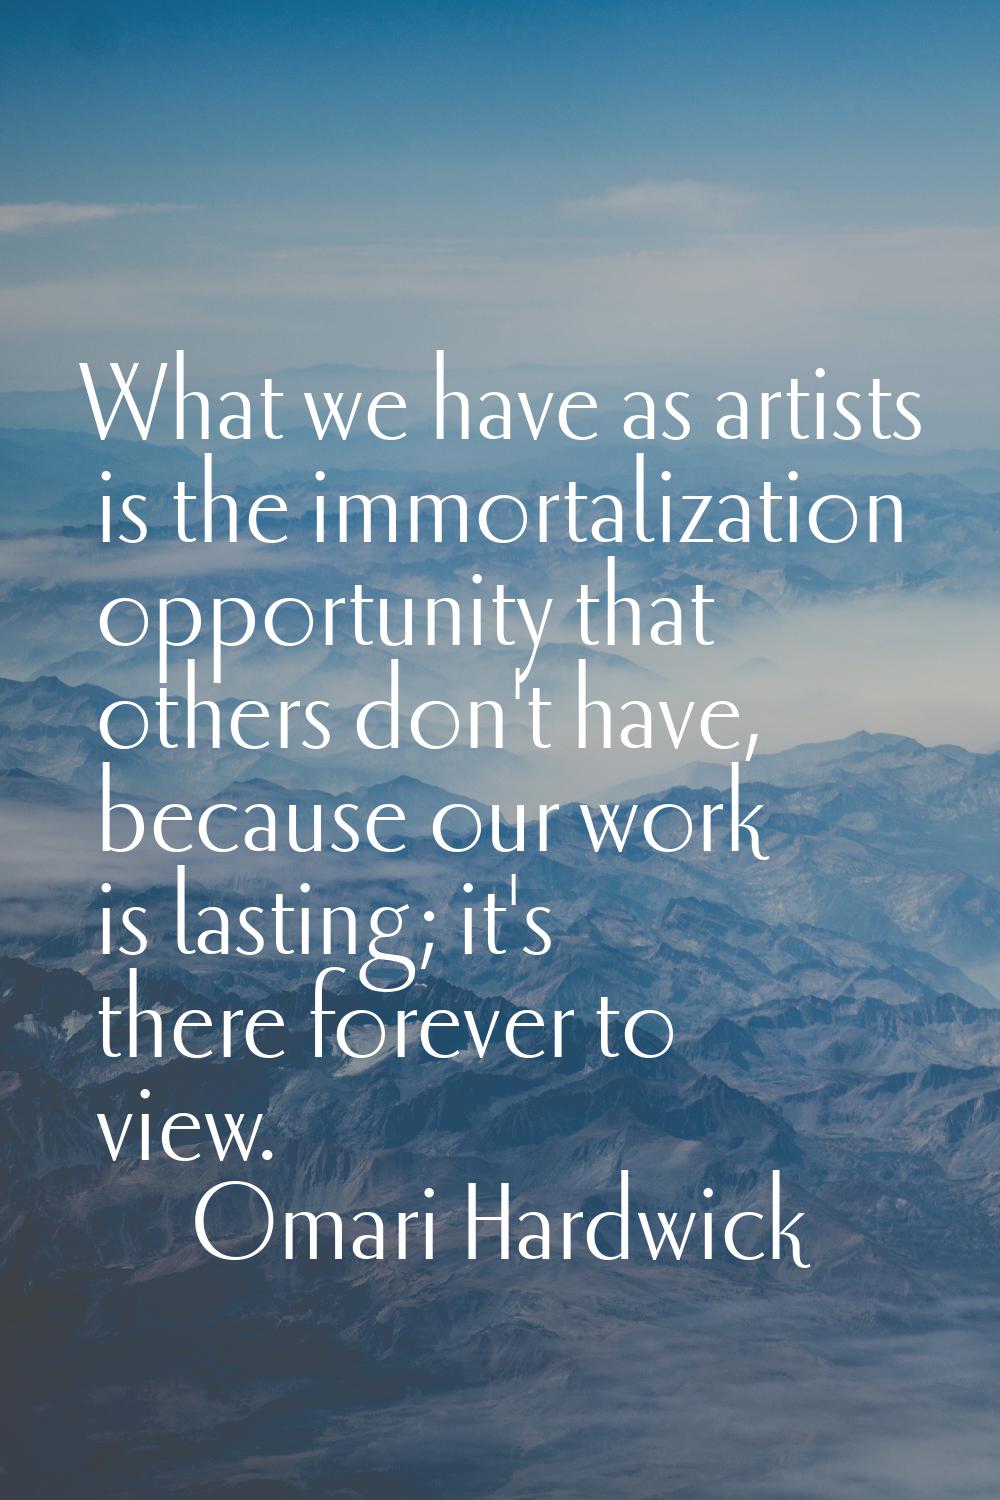 What we have as artists is the immortalization opportunity that others don't have, because our work